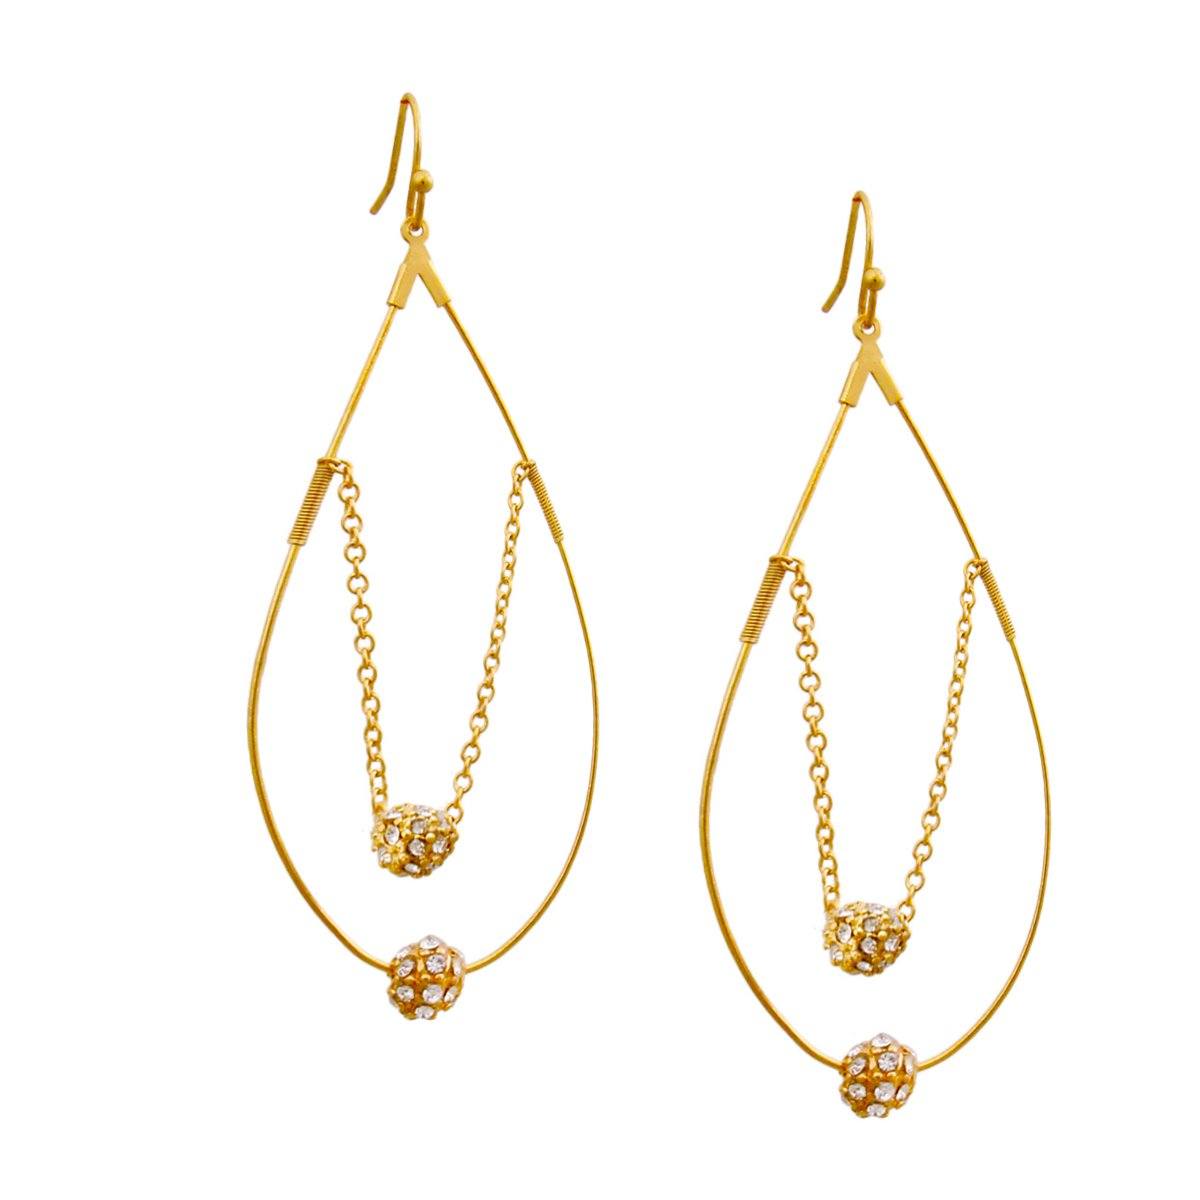 Gold Teardrop Earrings with Gold Chain and Rhinestone Ball Detail